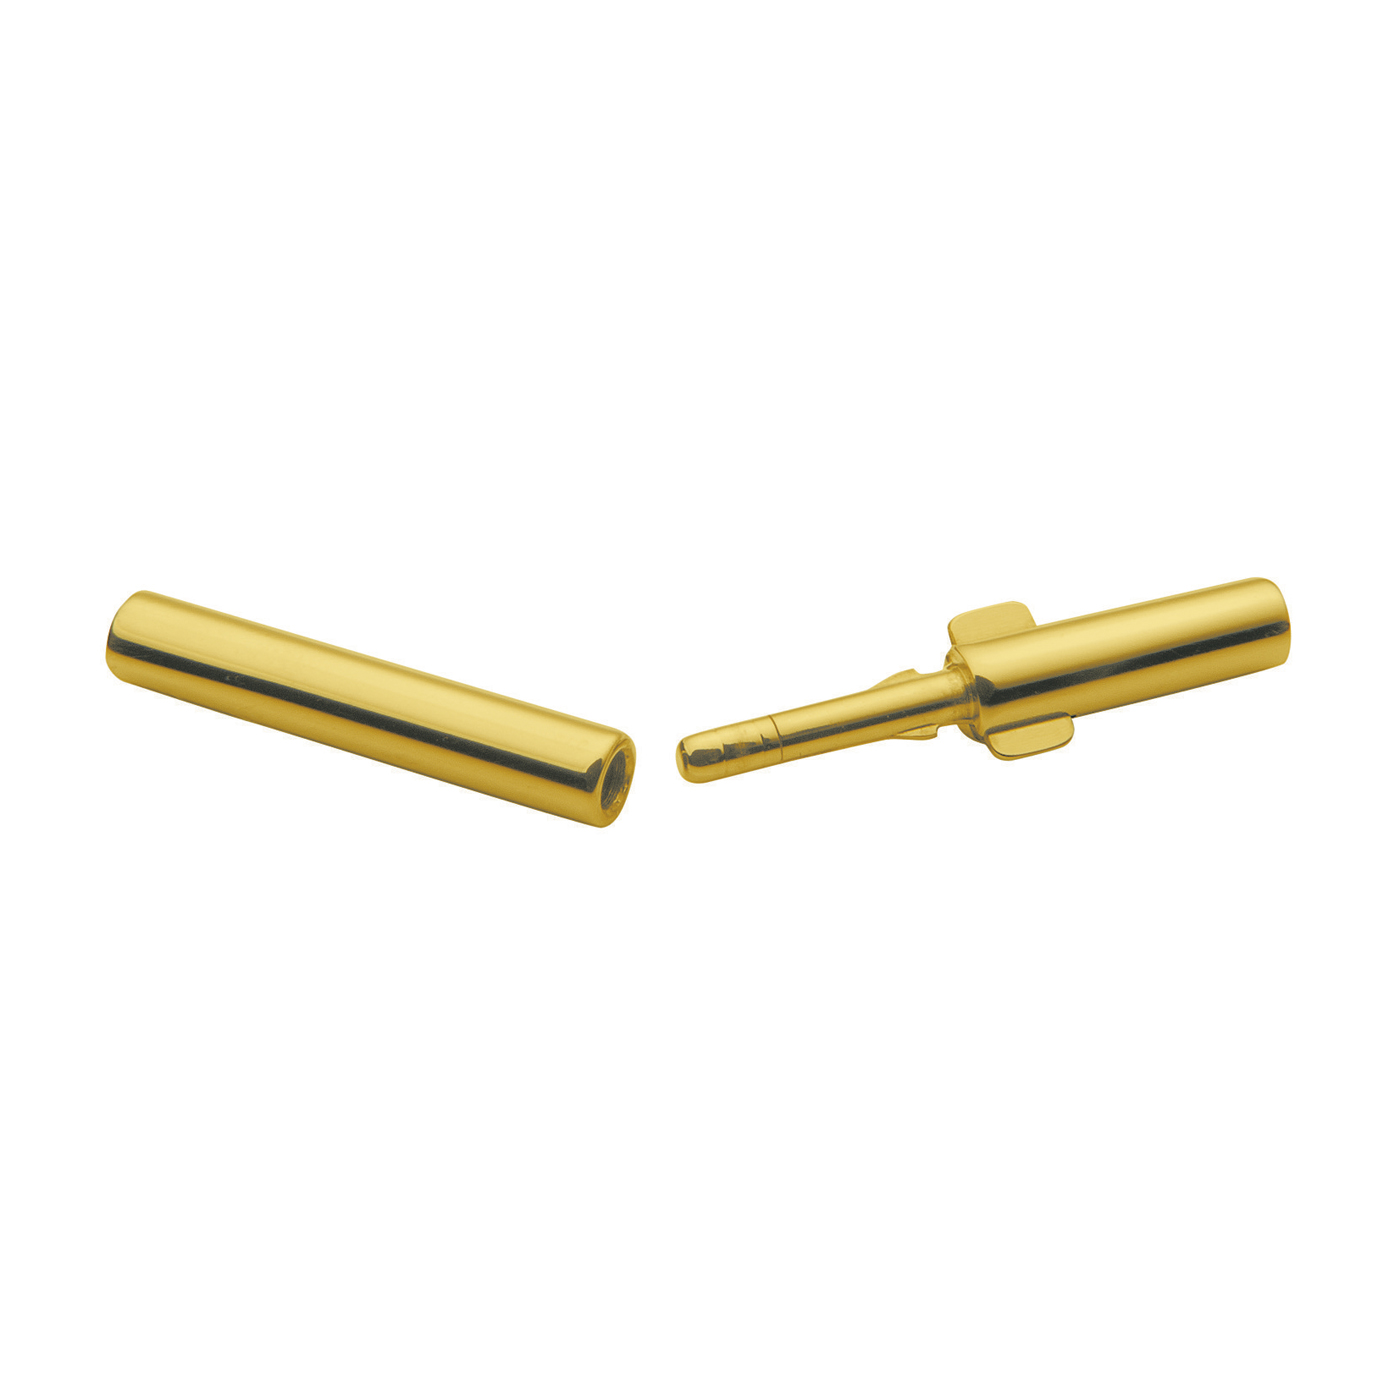 Double Clip Clasp, Stainless Steel Gold-Pl., ø 3.0 x 2.5 mm - 1 piece